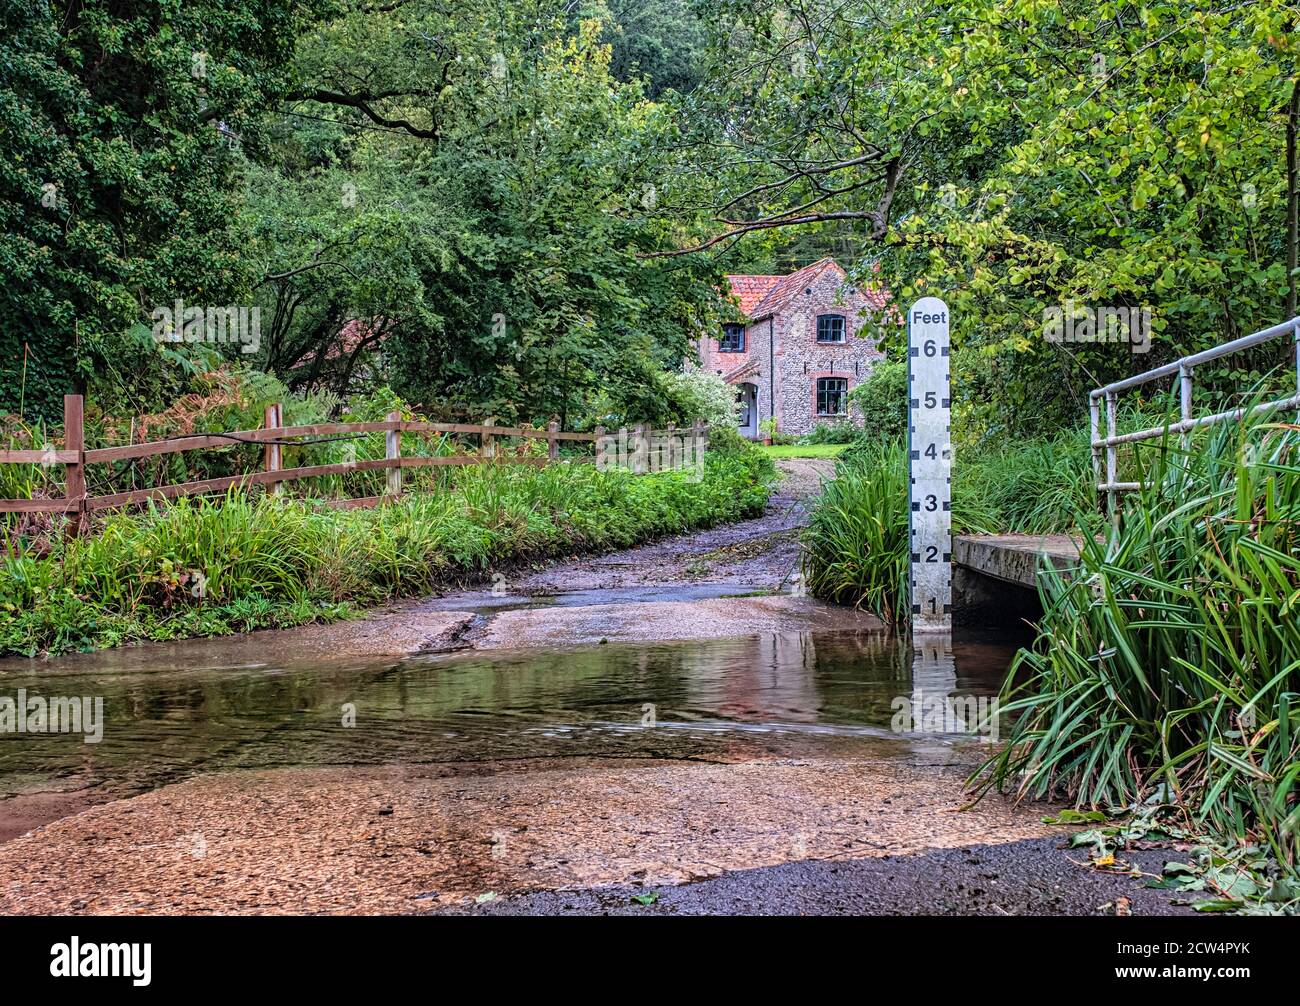 Scenic view at the ford over the river Glaven at Stody in Norfolk. Stock Photo